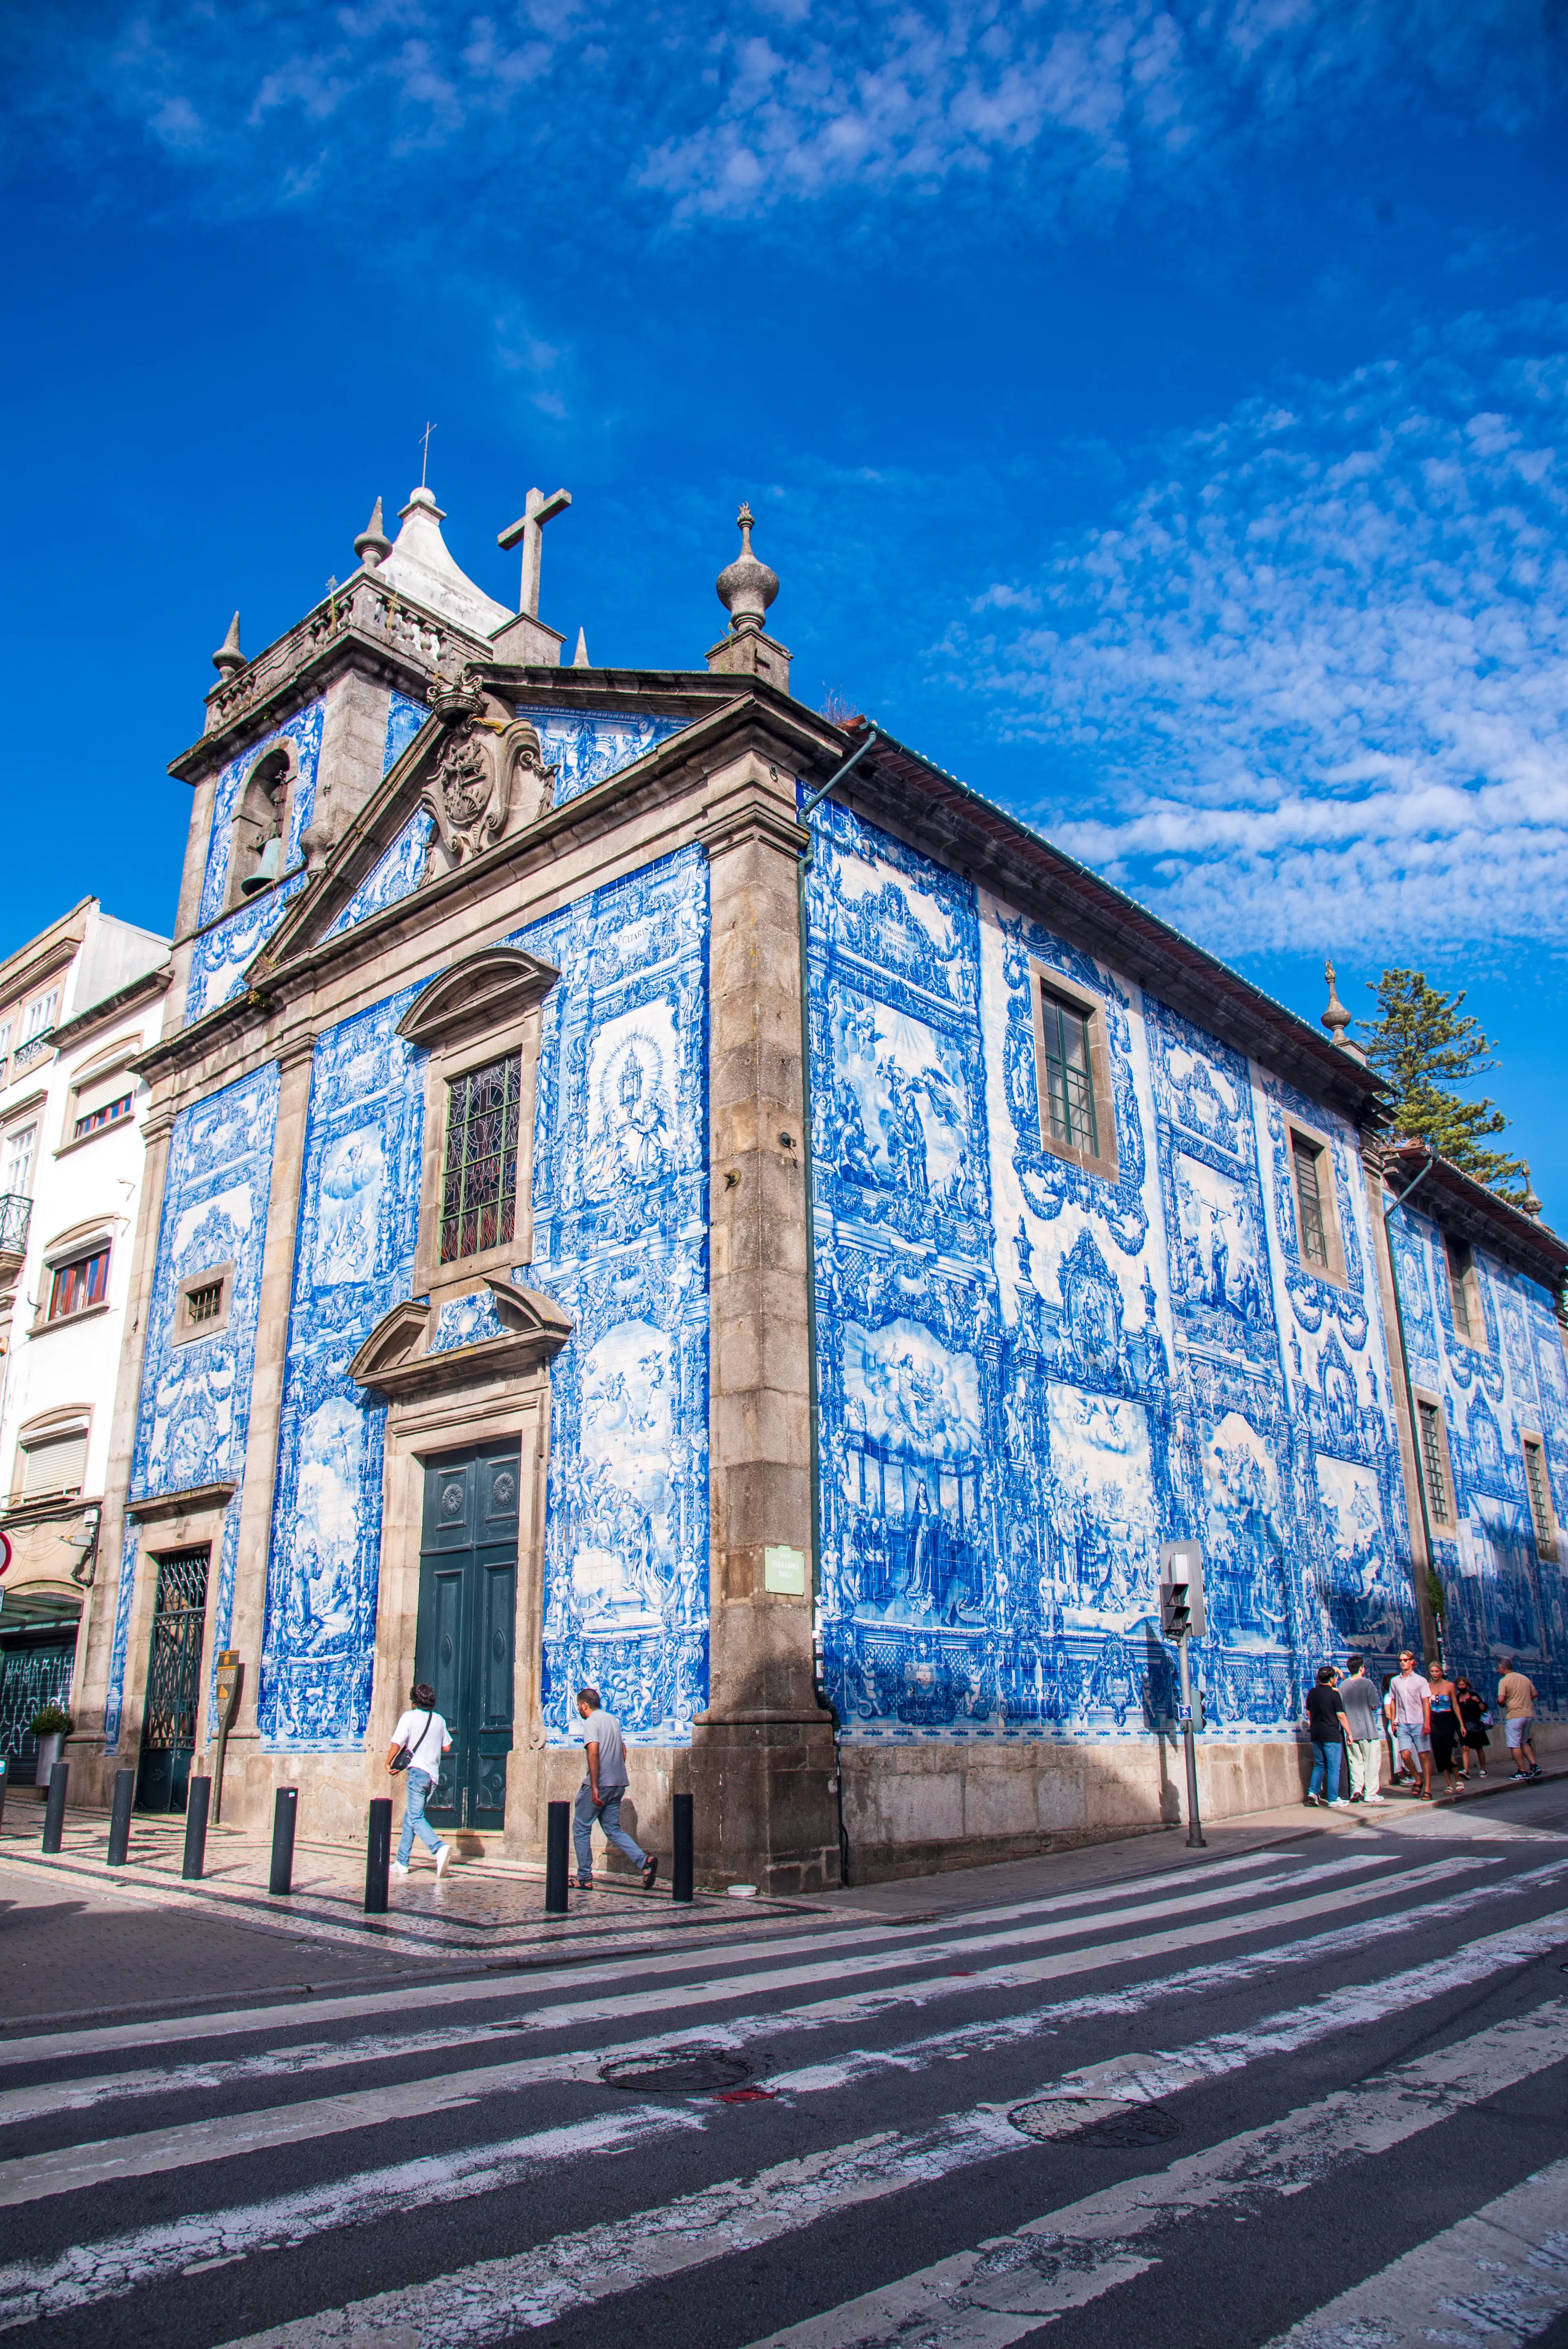 1-Day Local Family Adventure & Sightseeing in Porto